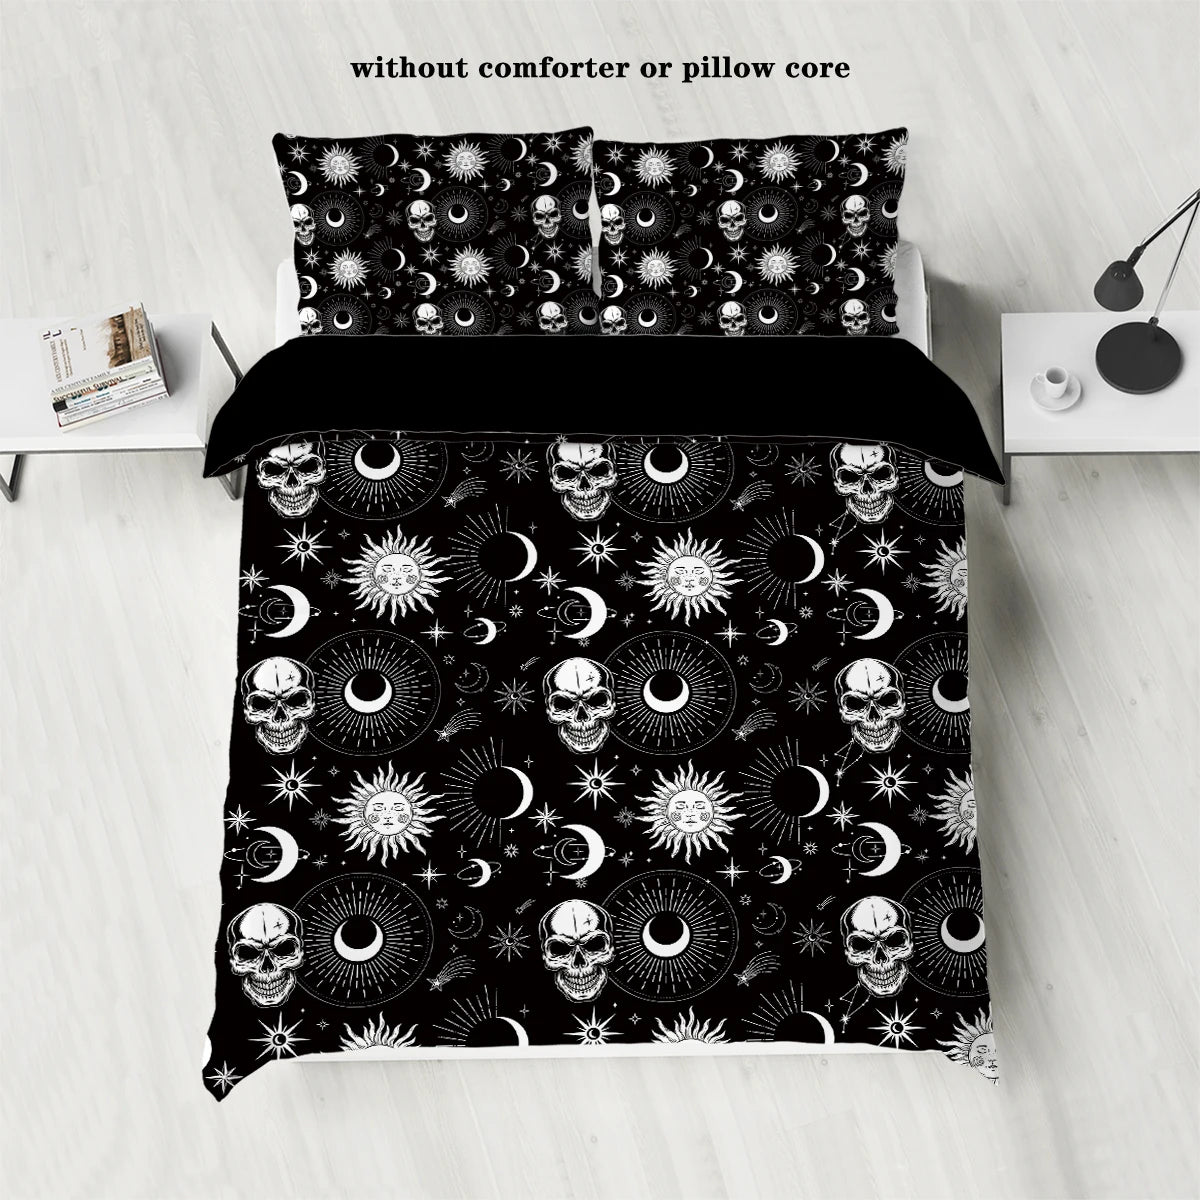 3pcs Tarot skull Moon Gothic Halloween - Soft Bedding for Bedroom/Guest Room - 1 Duvet Cover + 2 Pillowcases (Core Not Included)